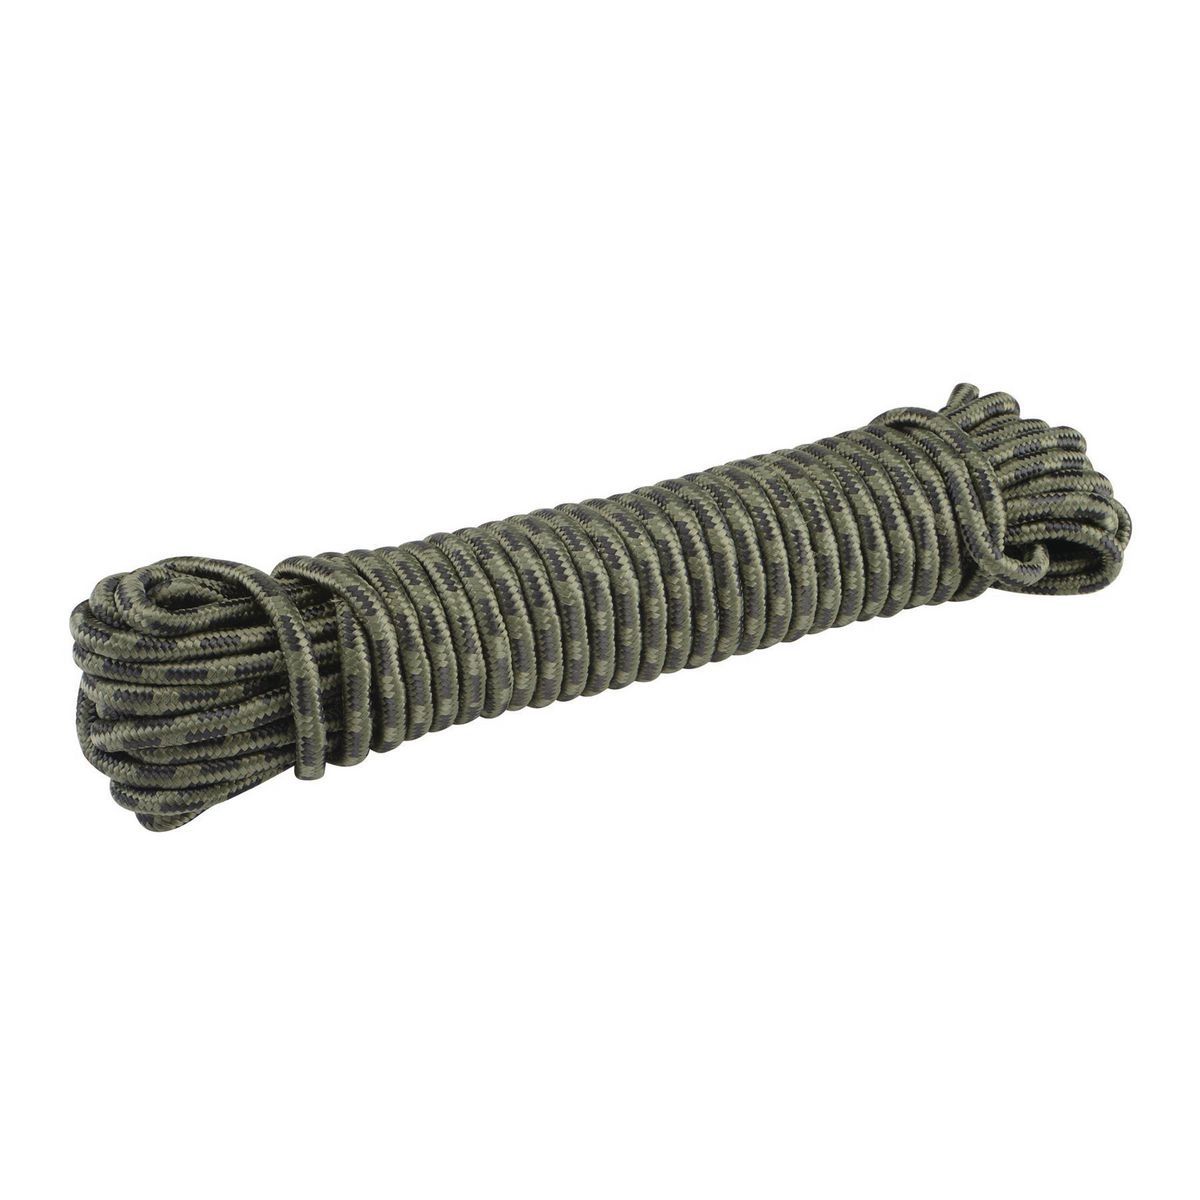 HAUL-MASTER 75 Ft. x 3/8" Camouflage Poly Rope